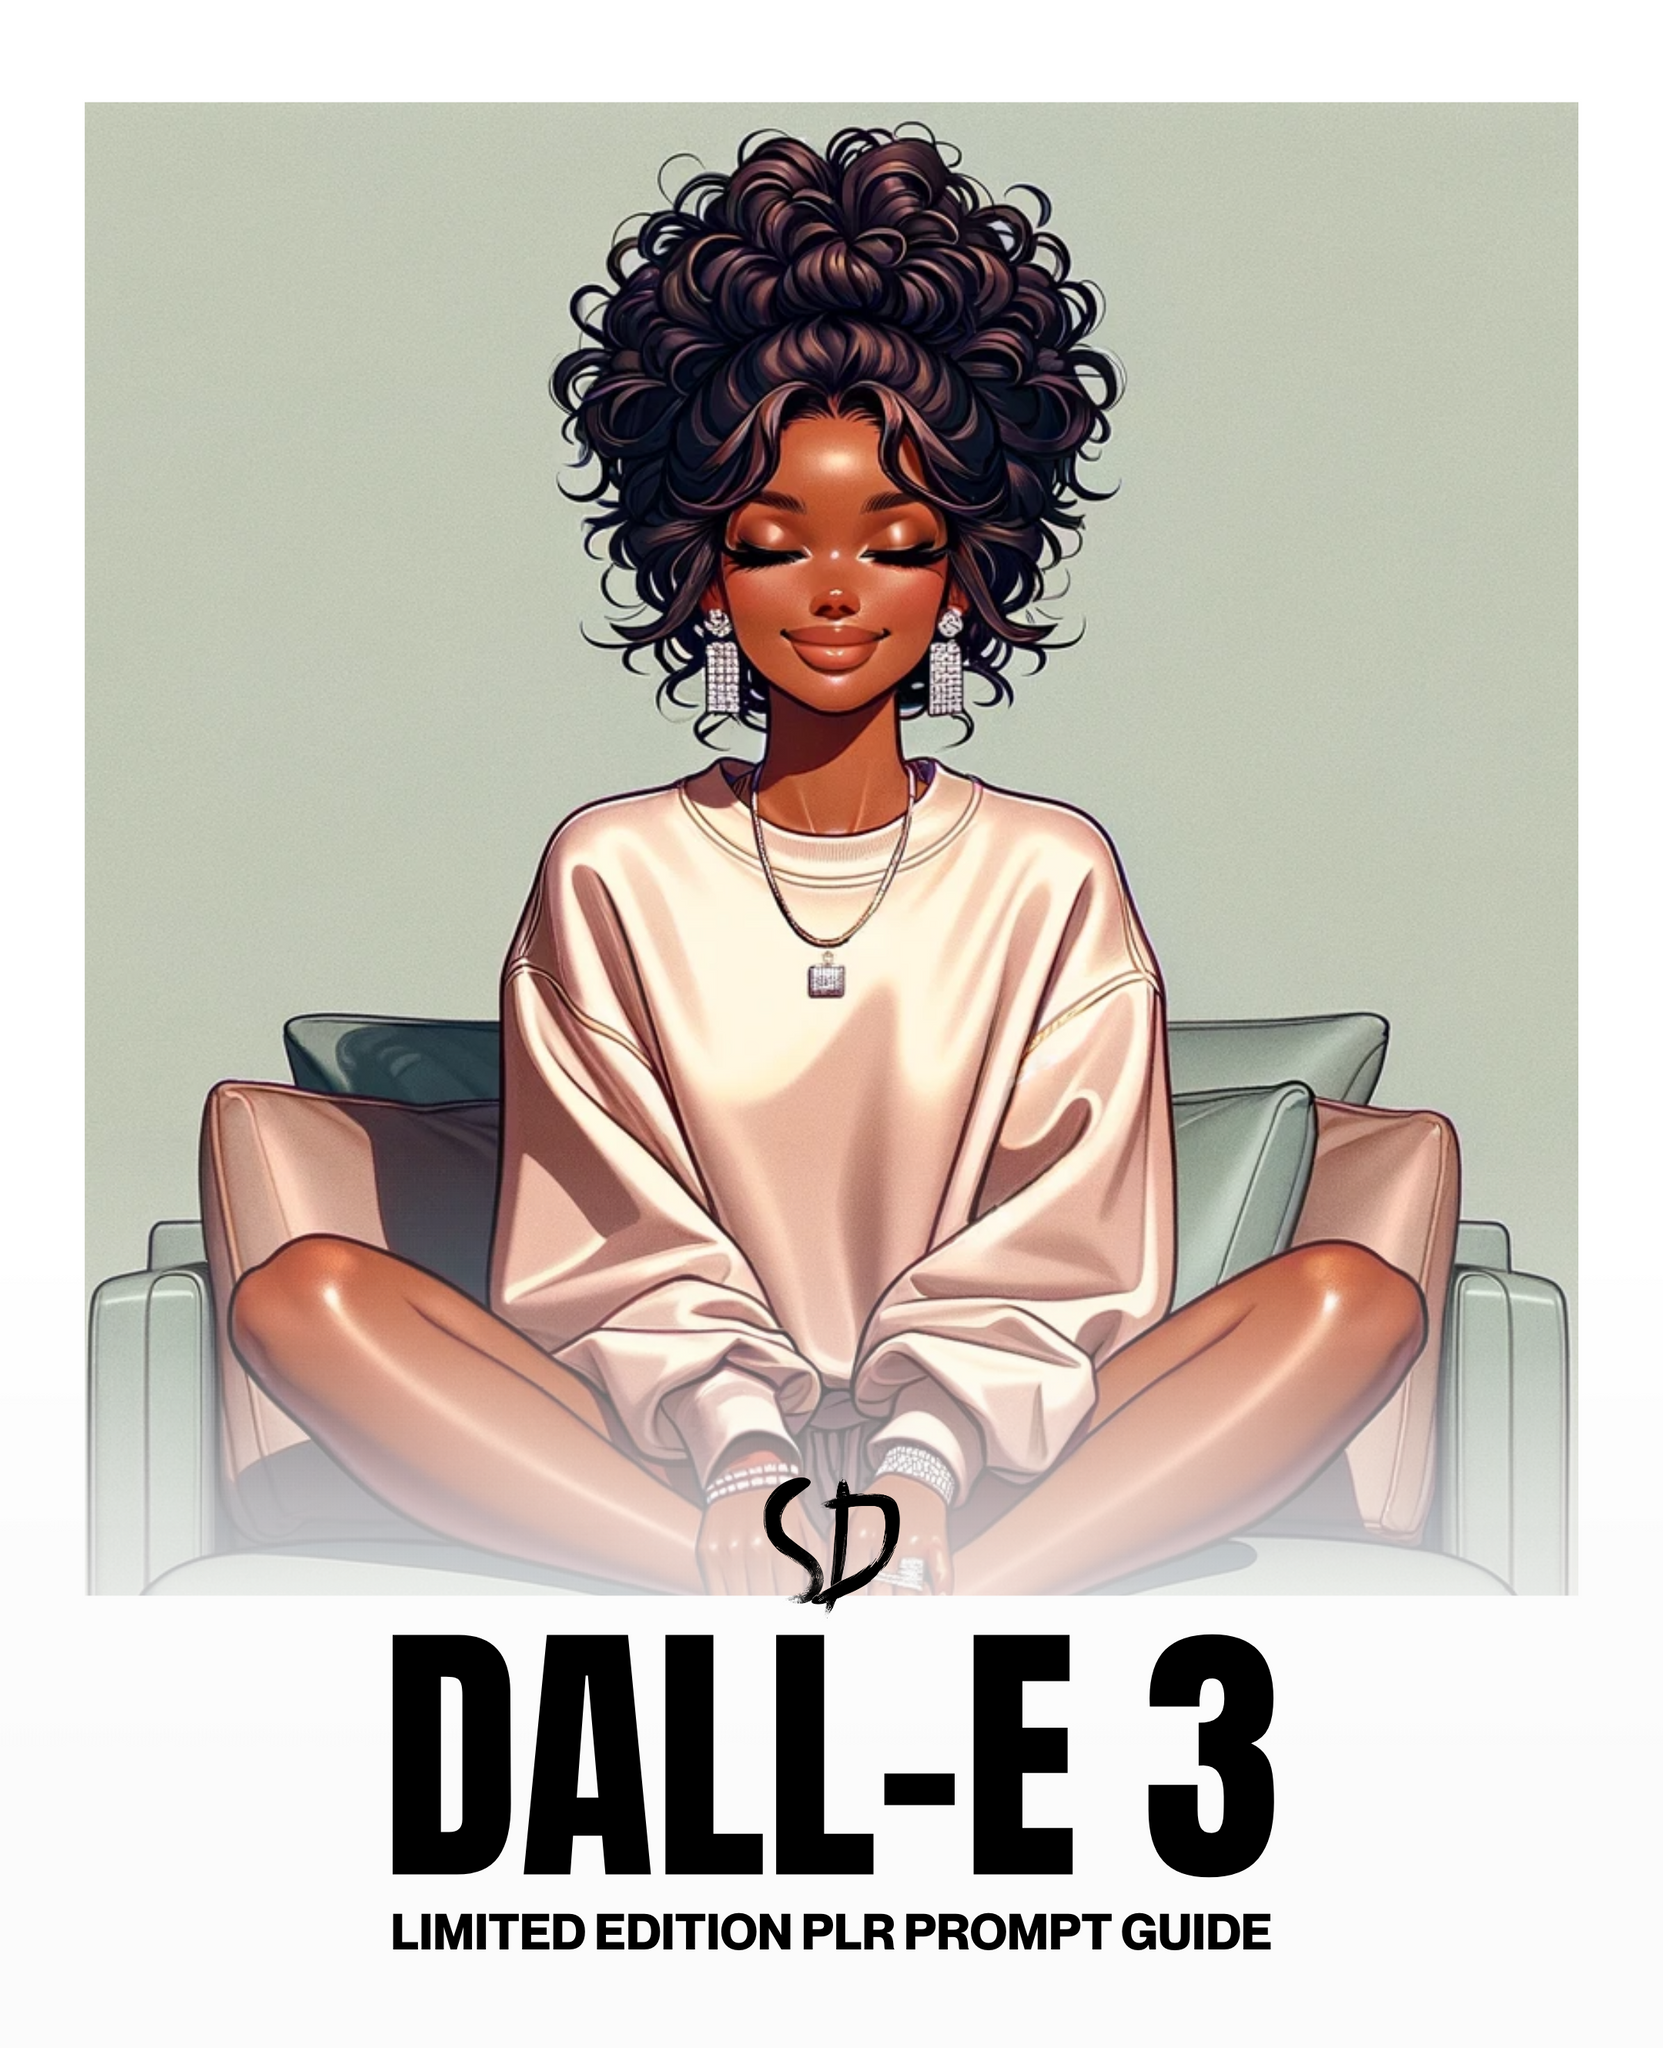 Your World | Limited Edition Dall-E 3 Prompt Guide